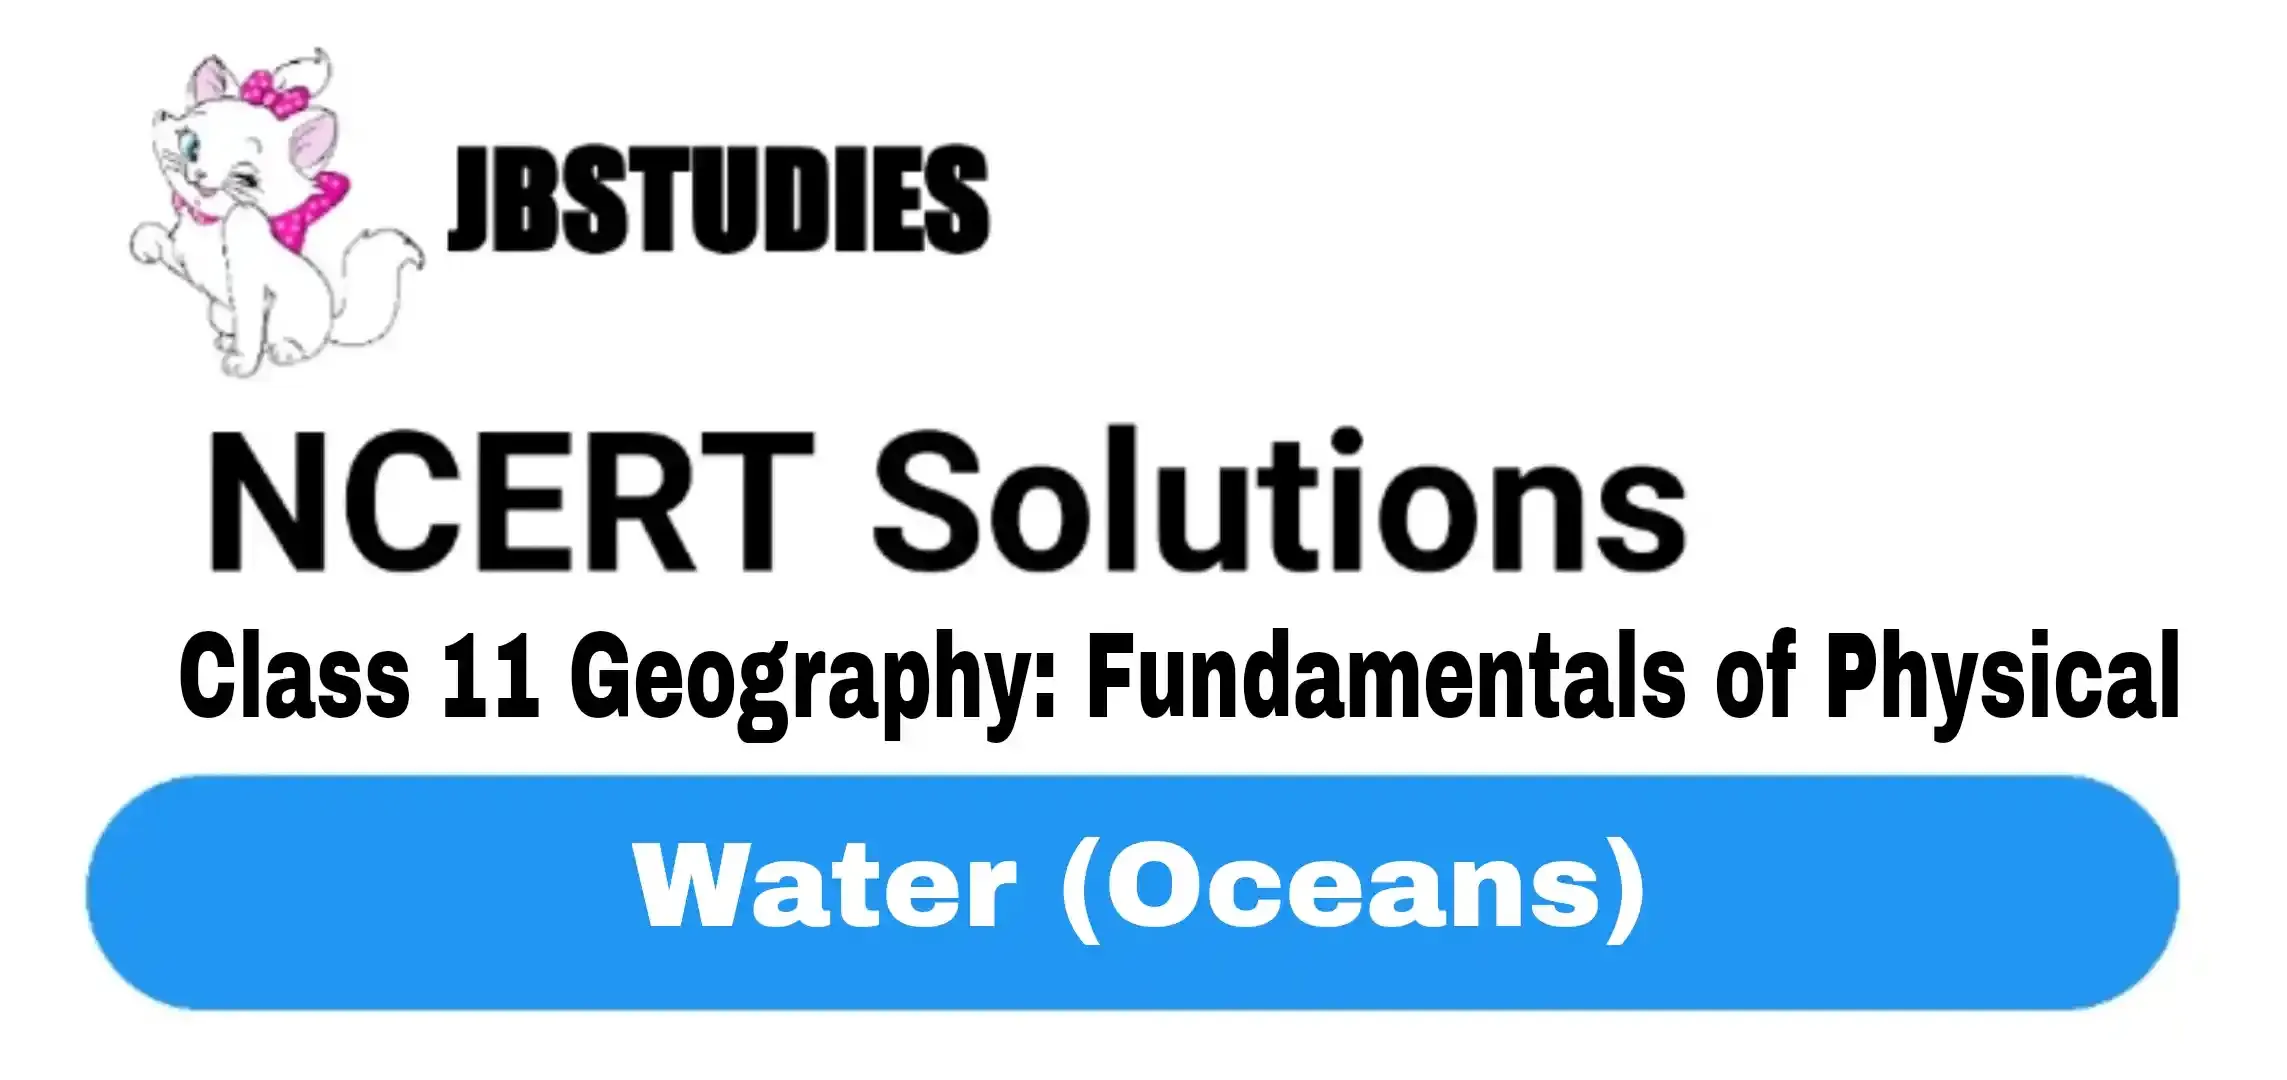 Solutions Class 11 Geography Chapter-13 Water (Oceans)